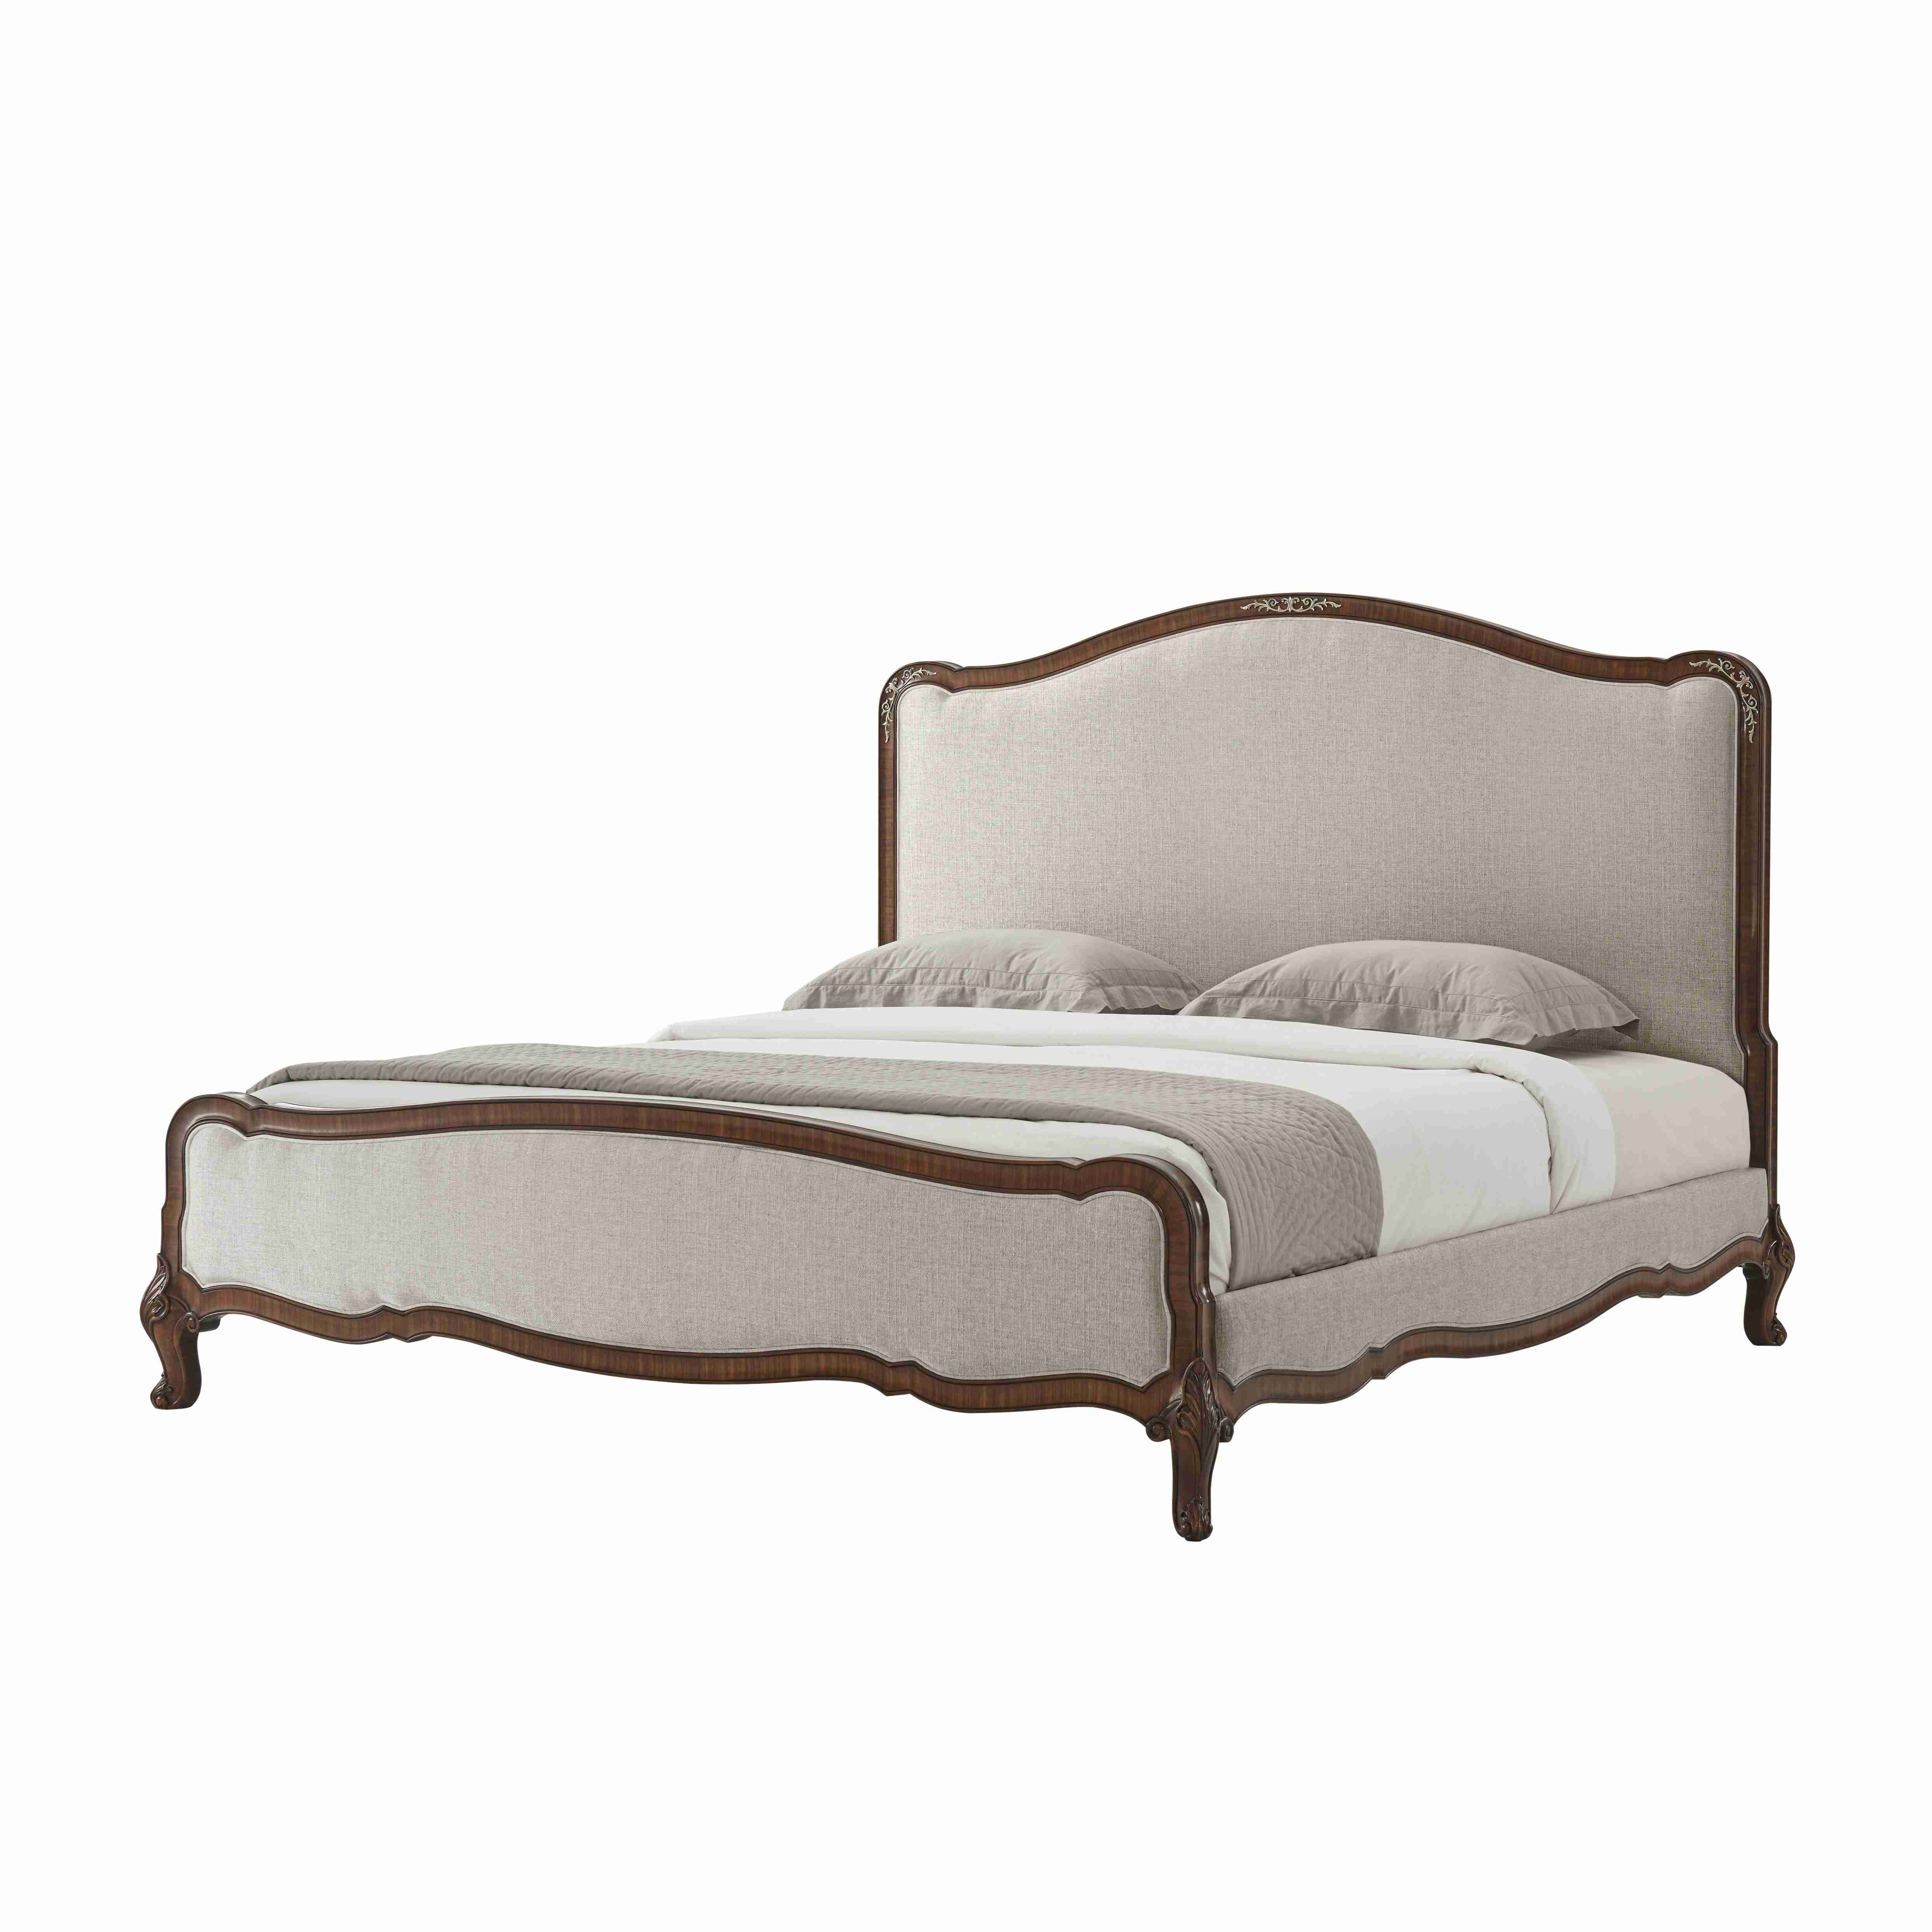 EULALIE US KING BED